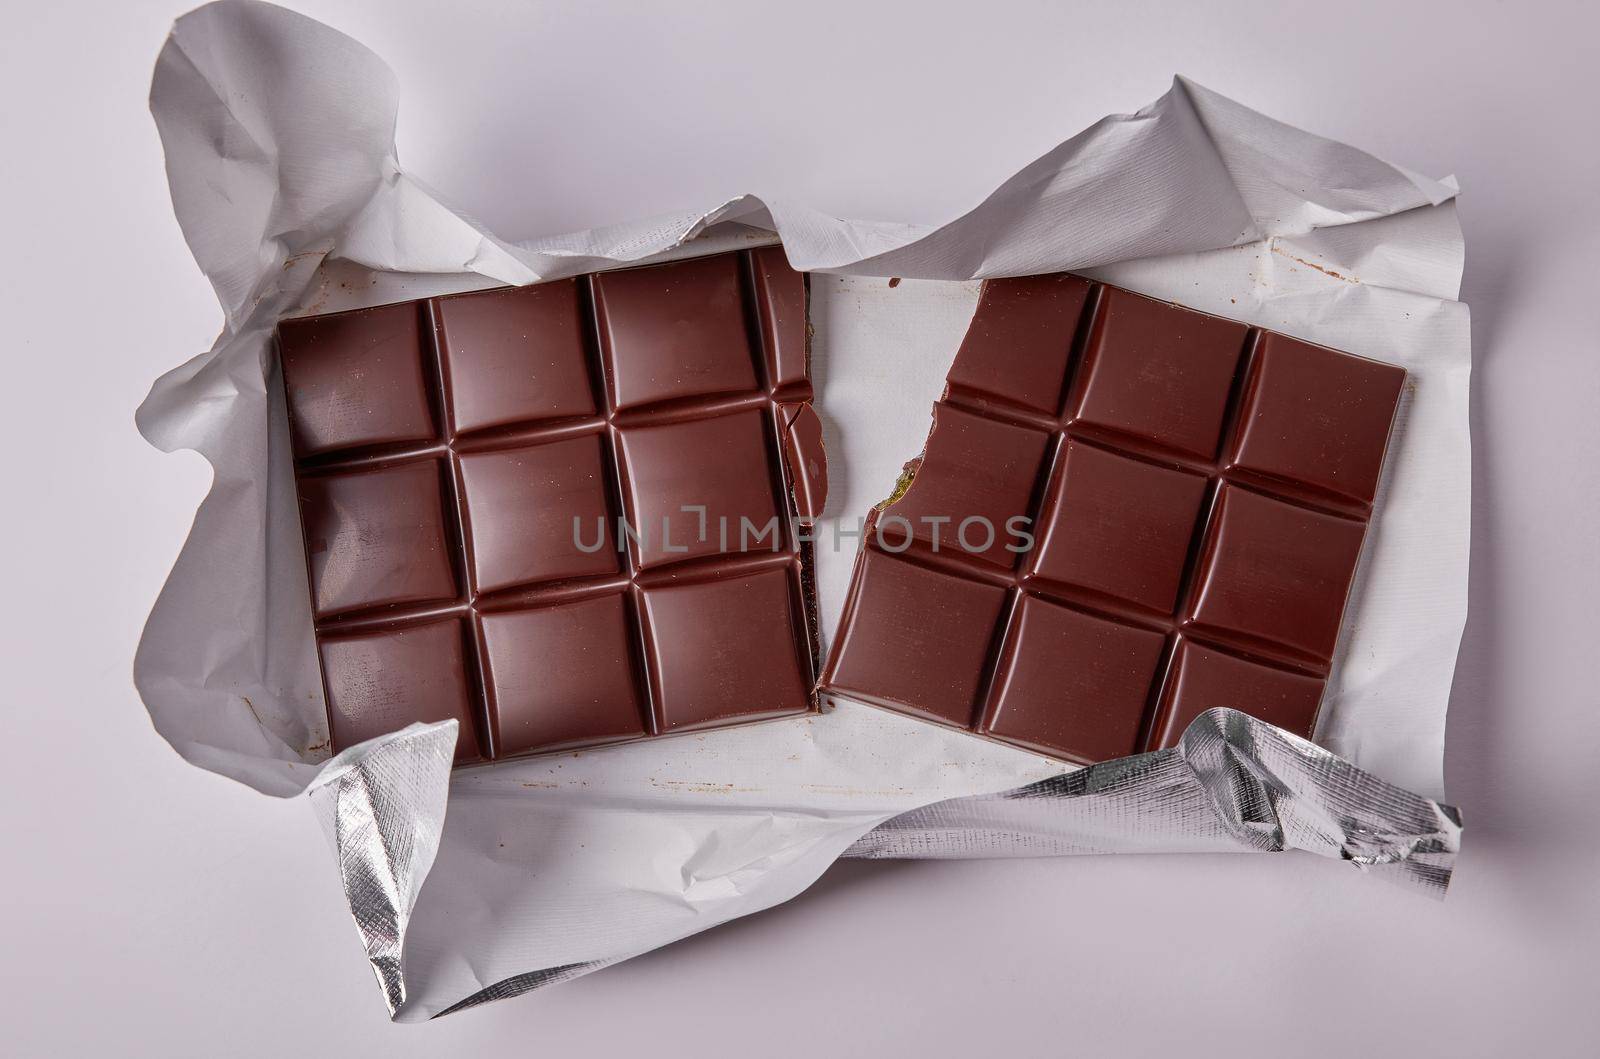 dark chocolate bar divided into two halves on foil